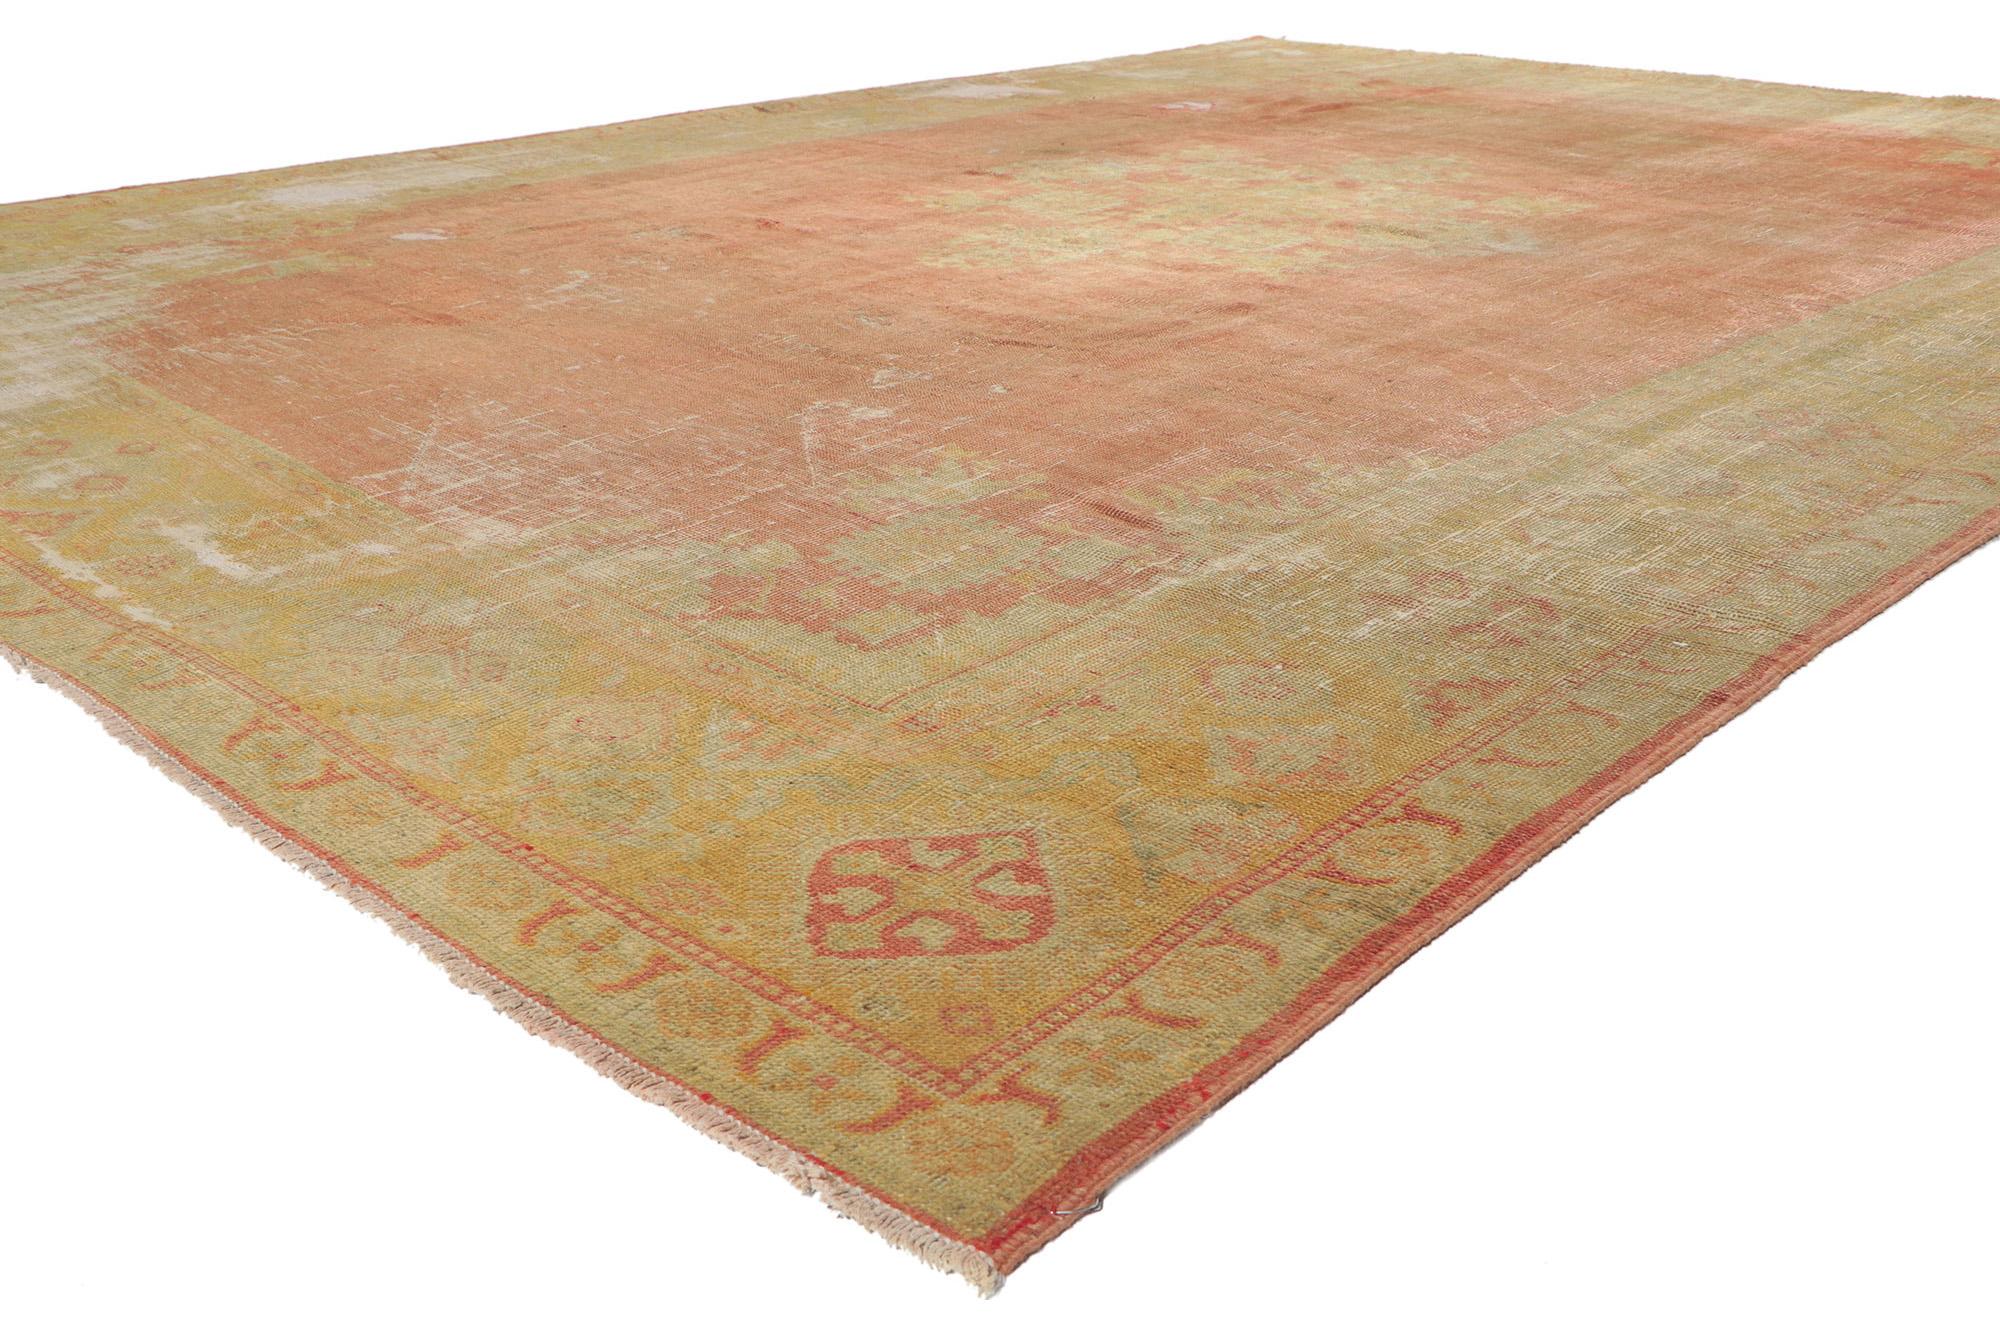 51238 Antique-Worn Turkish Oushak Rug, 09'07 X 13'00. 
Weathered finesse meets relaxed refinement in this hand knotted wool distressed antique Turkish Oushak rug. Let yourself be whisked away on an enchanting journey of sustainability, as you step